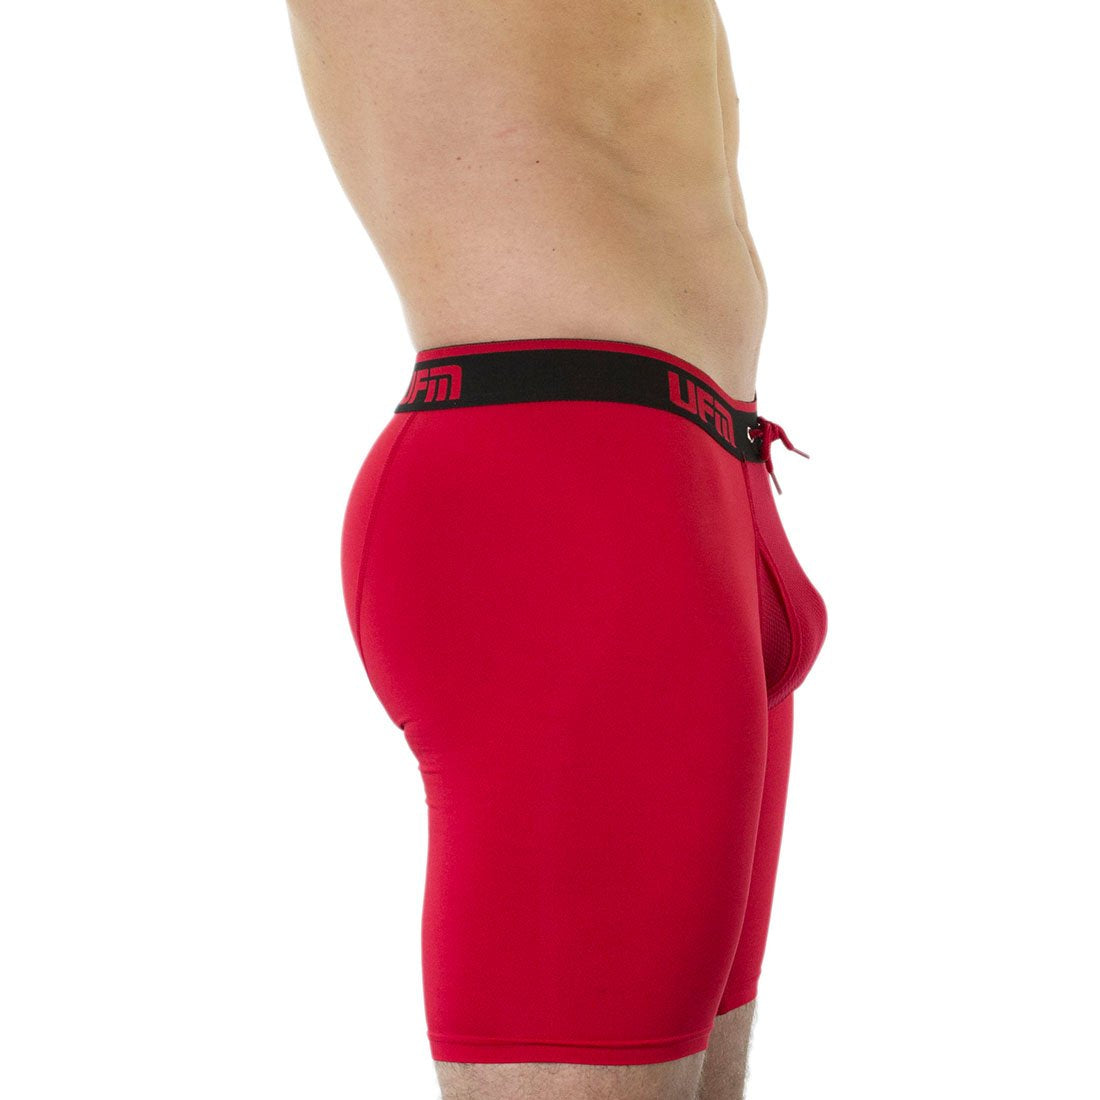 REG Support 9 Inch Boxer Briefs Polyester Available in Black, Gray,